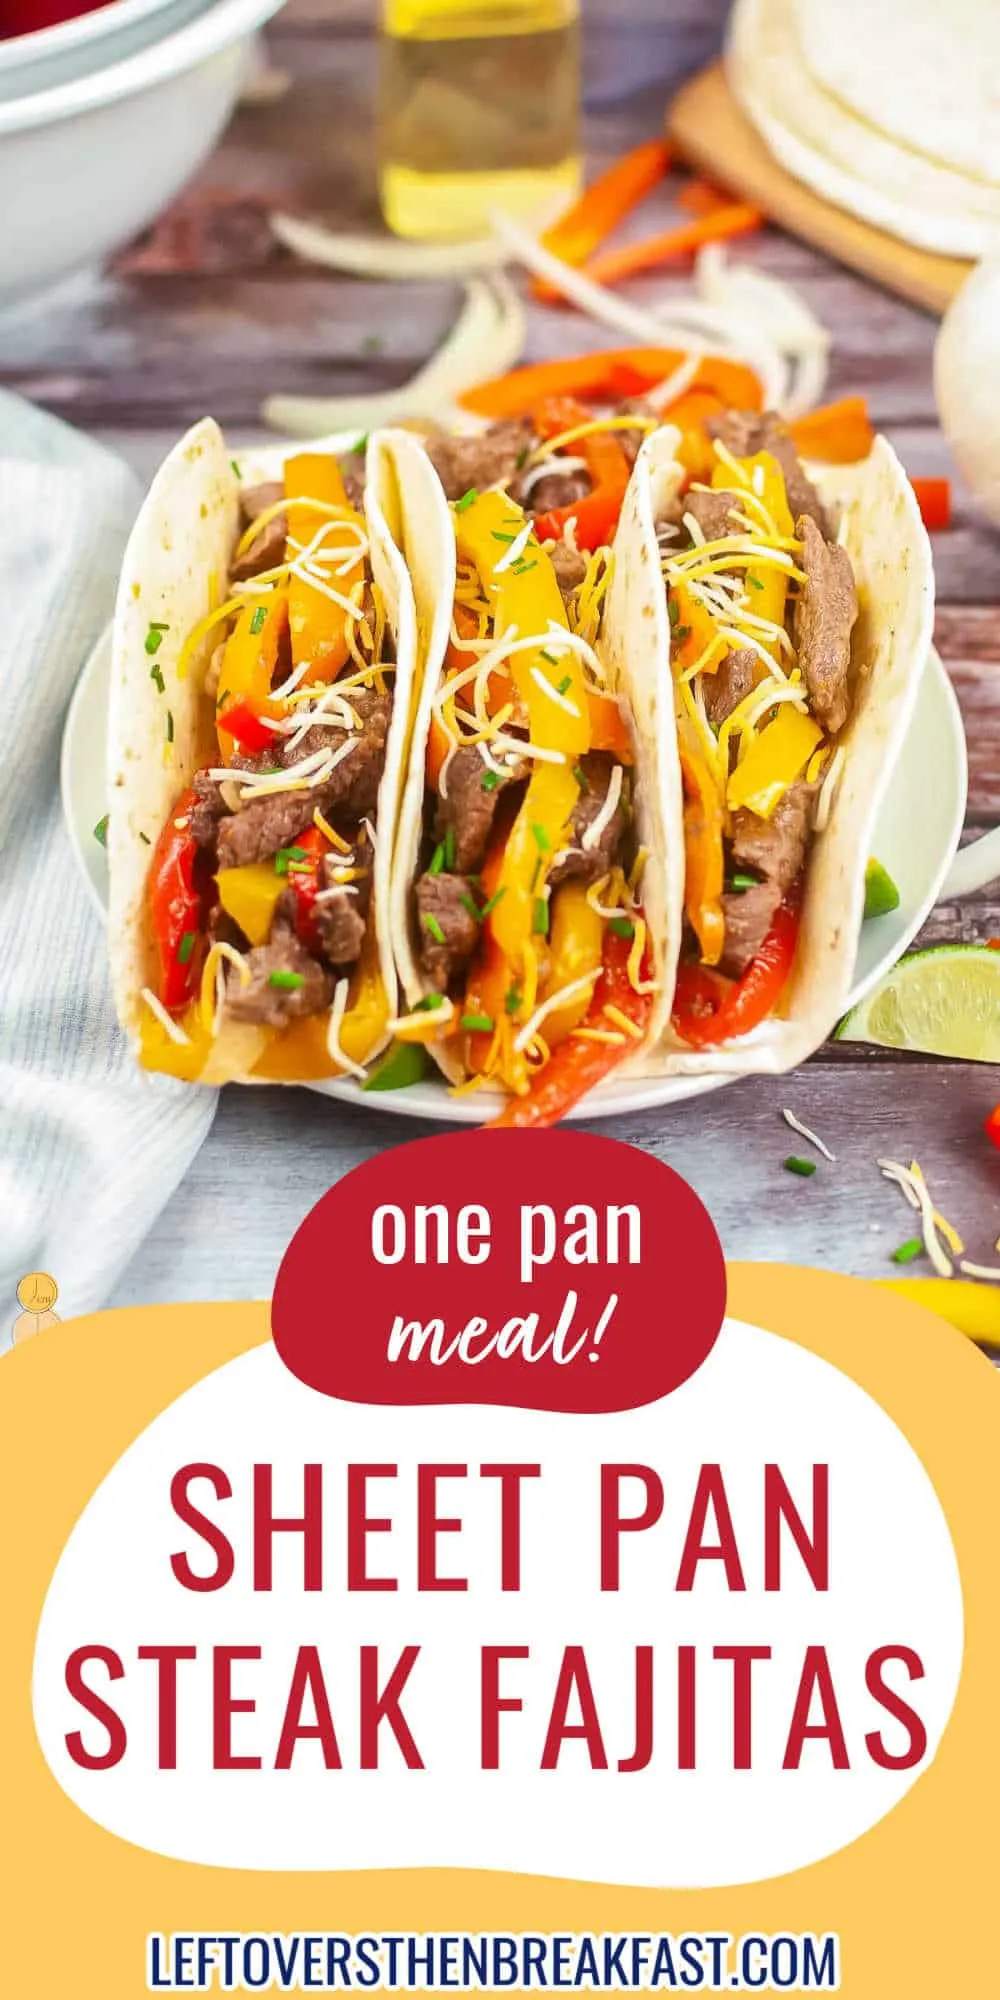 sheet pan steak fajitas with yellow banner and red text